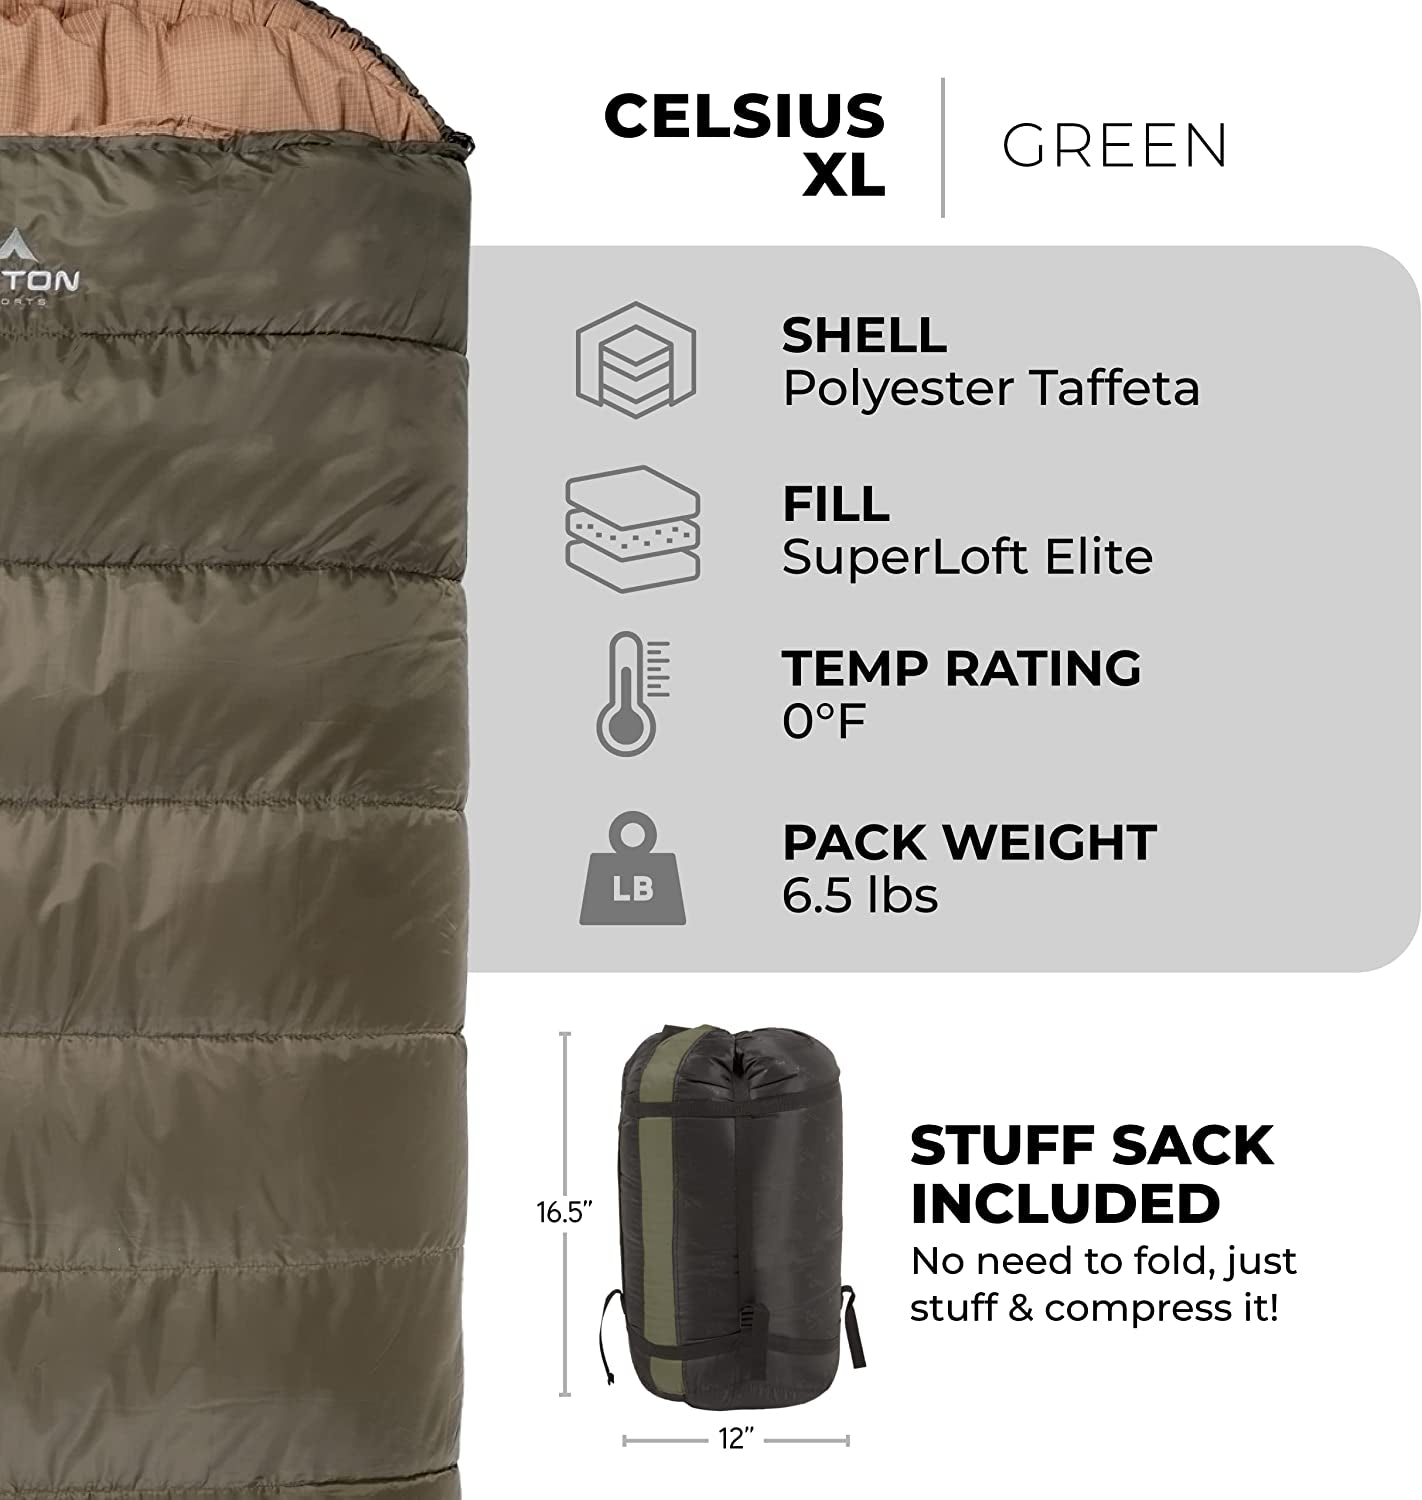 Celsius XL Sleeping Bag; Great for Family Camping; Free Compression Sack